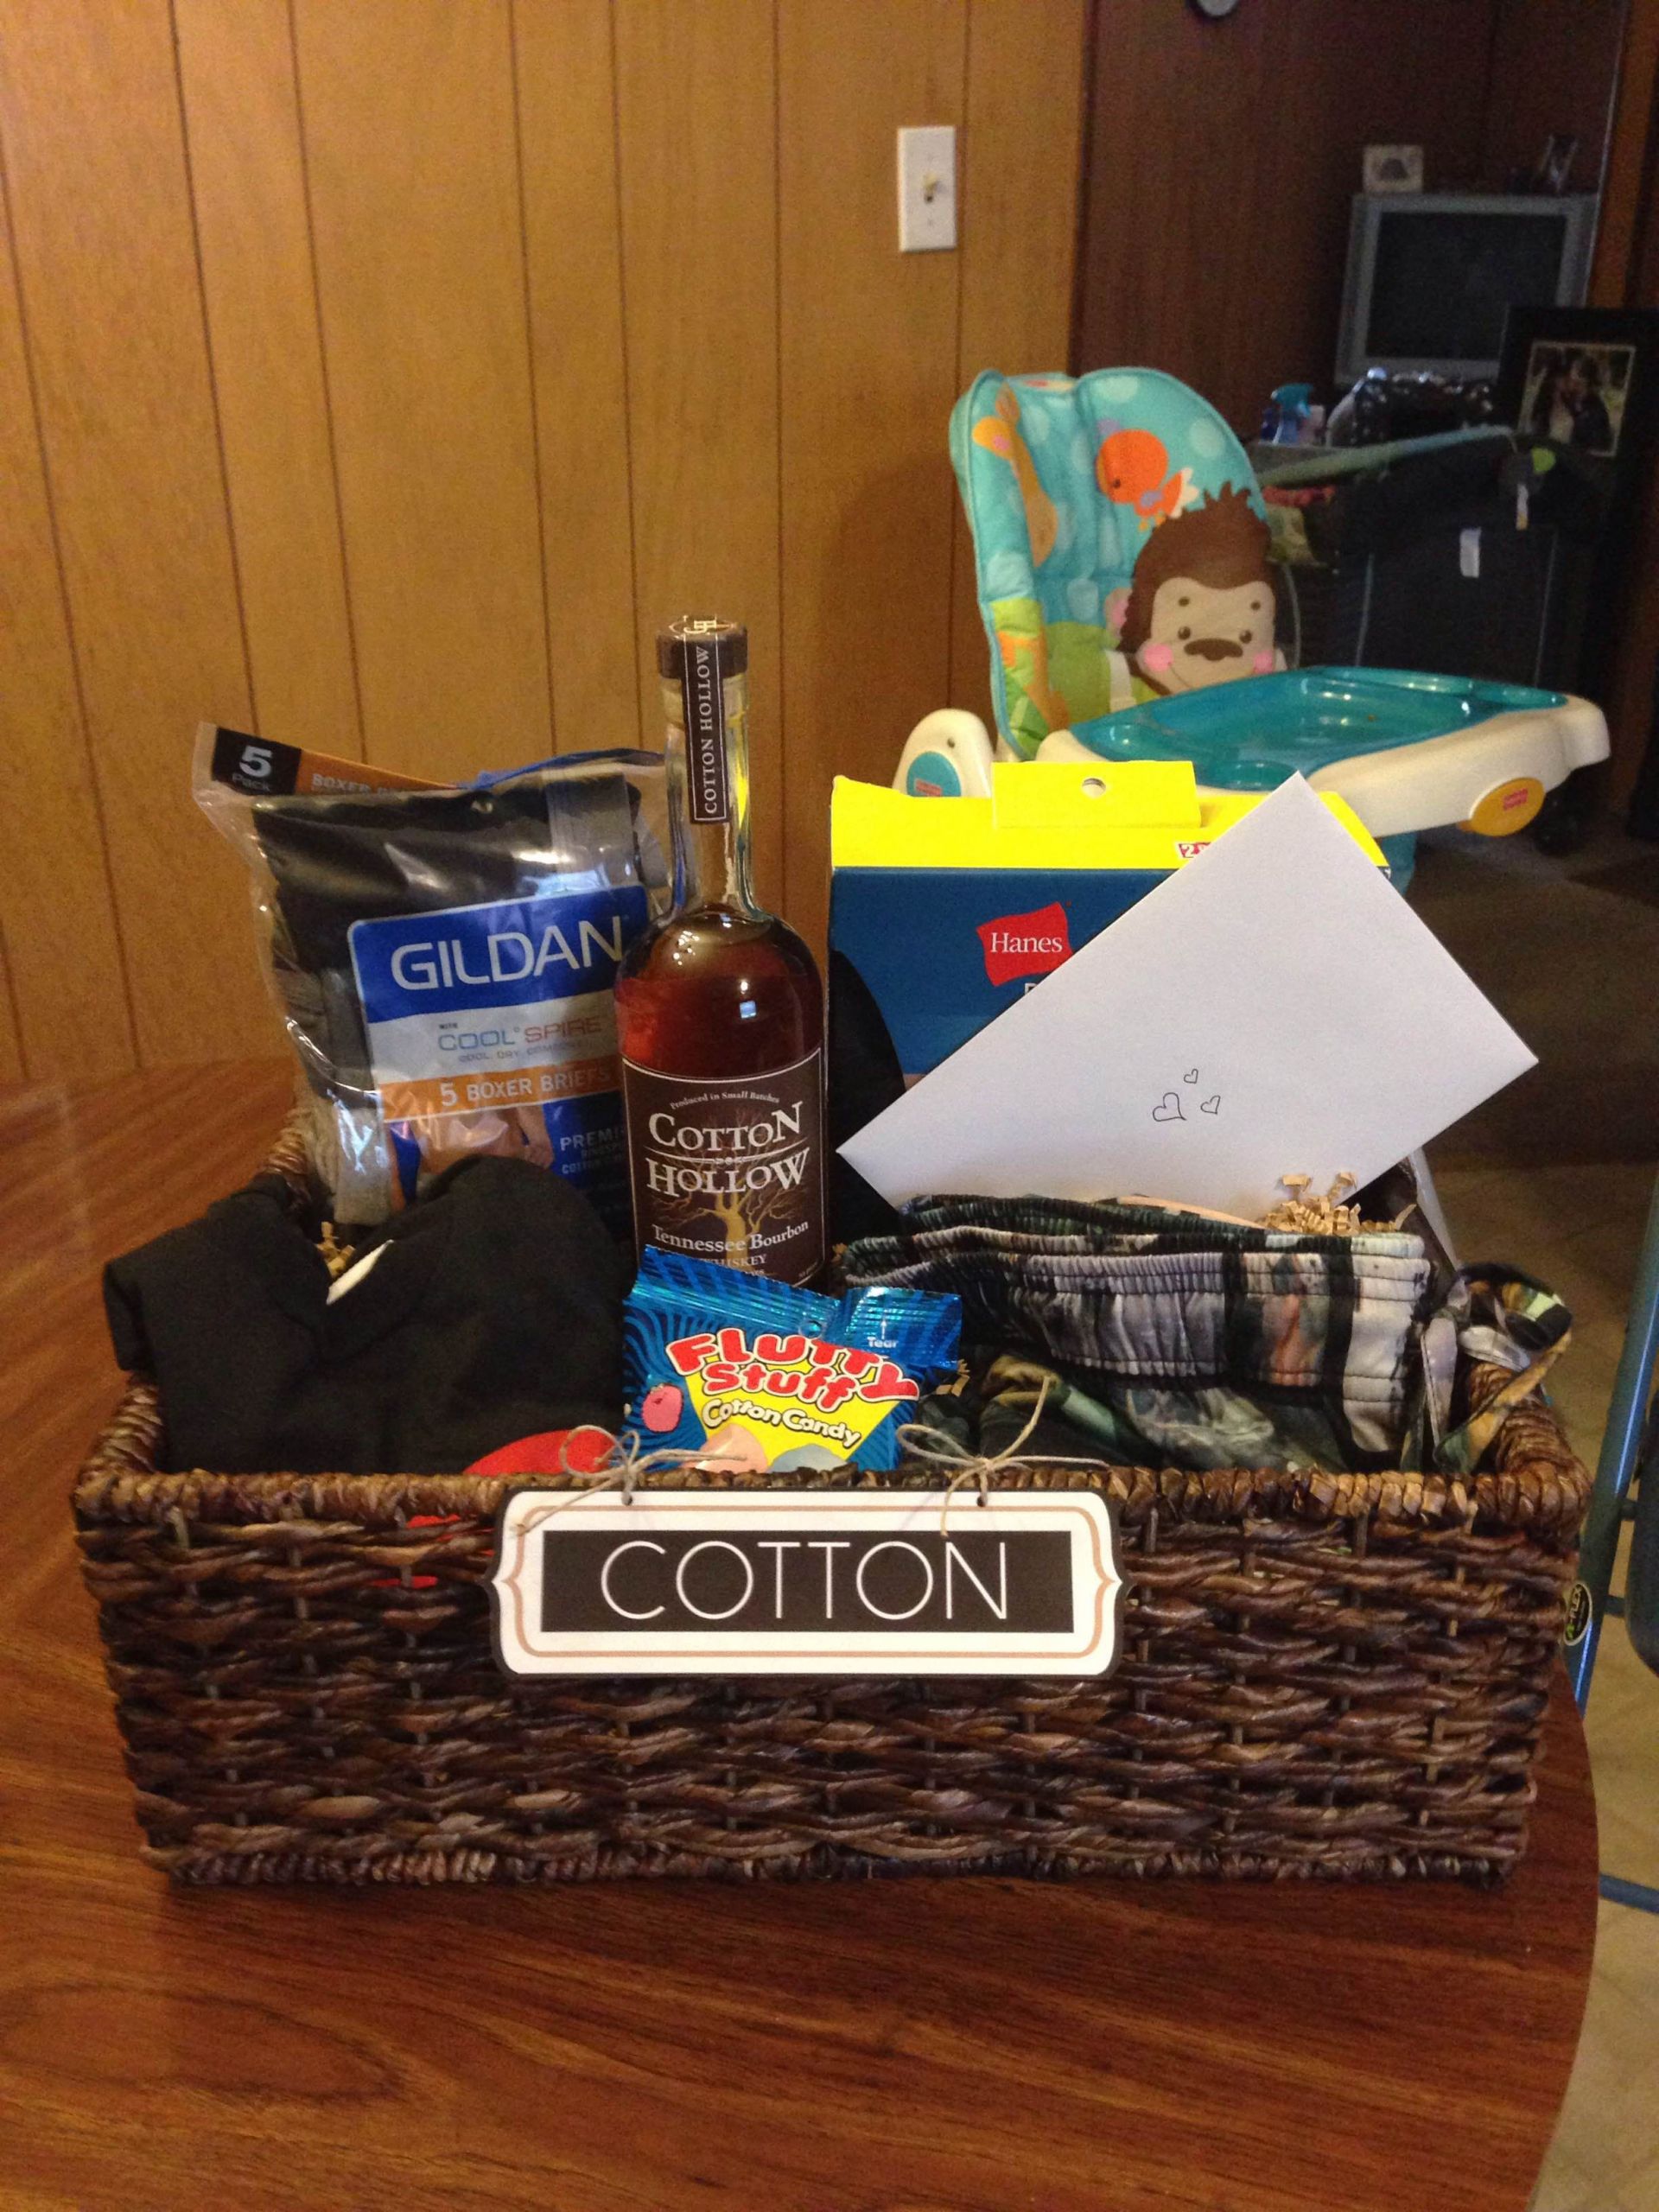 2Nd Year Anniversary Gift Ideas For Husband
 "Cotton" t basket I put to her for my husband for our